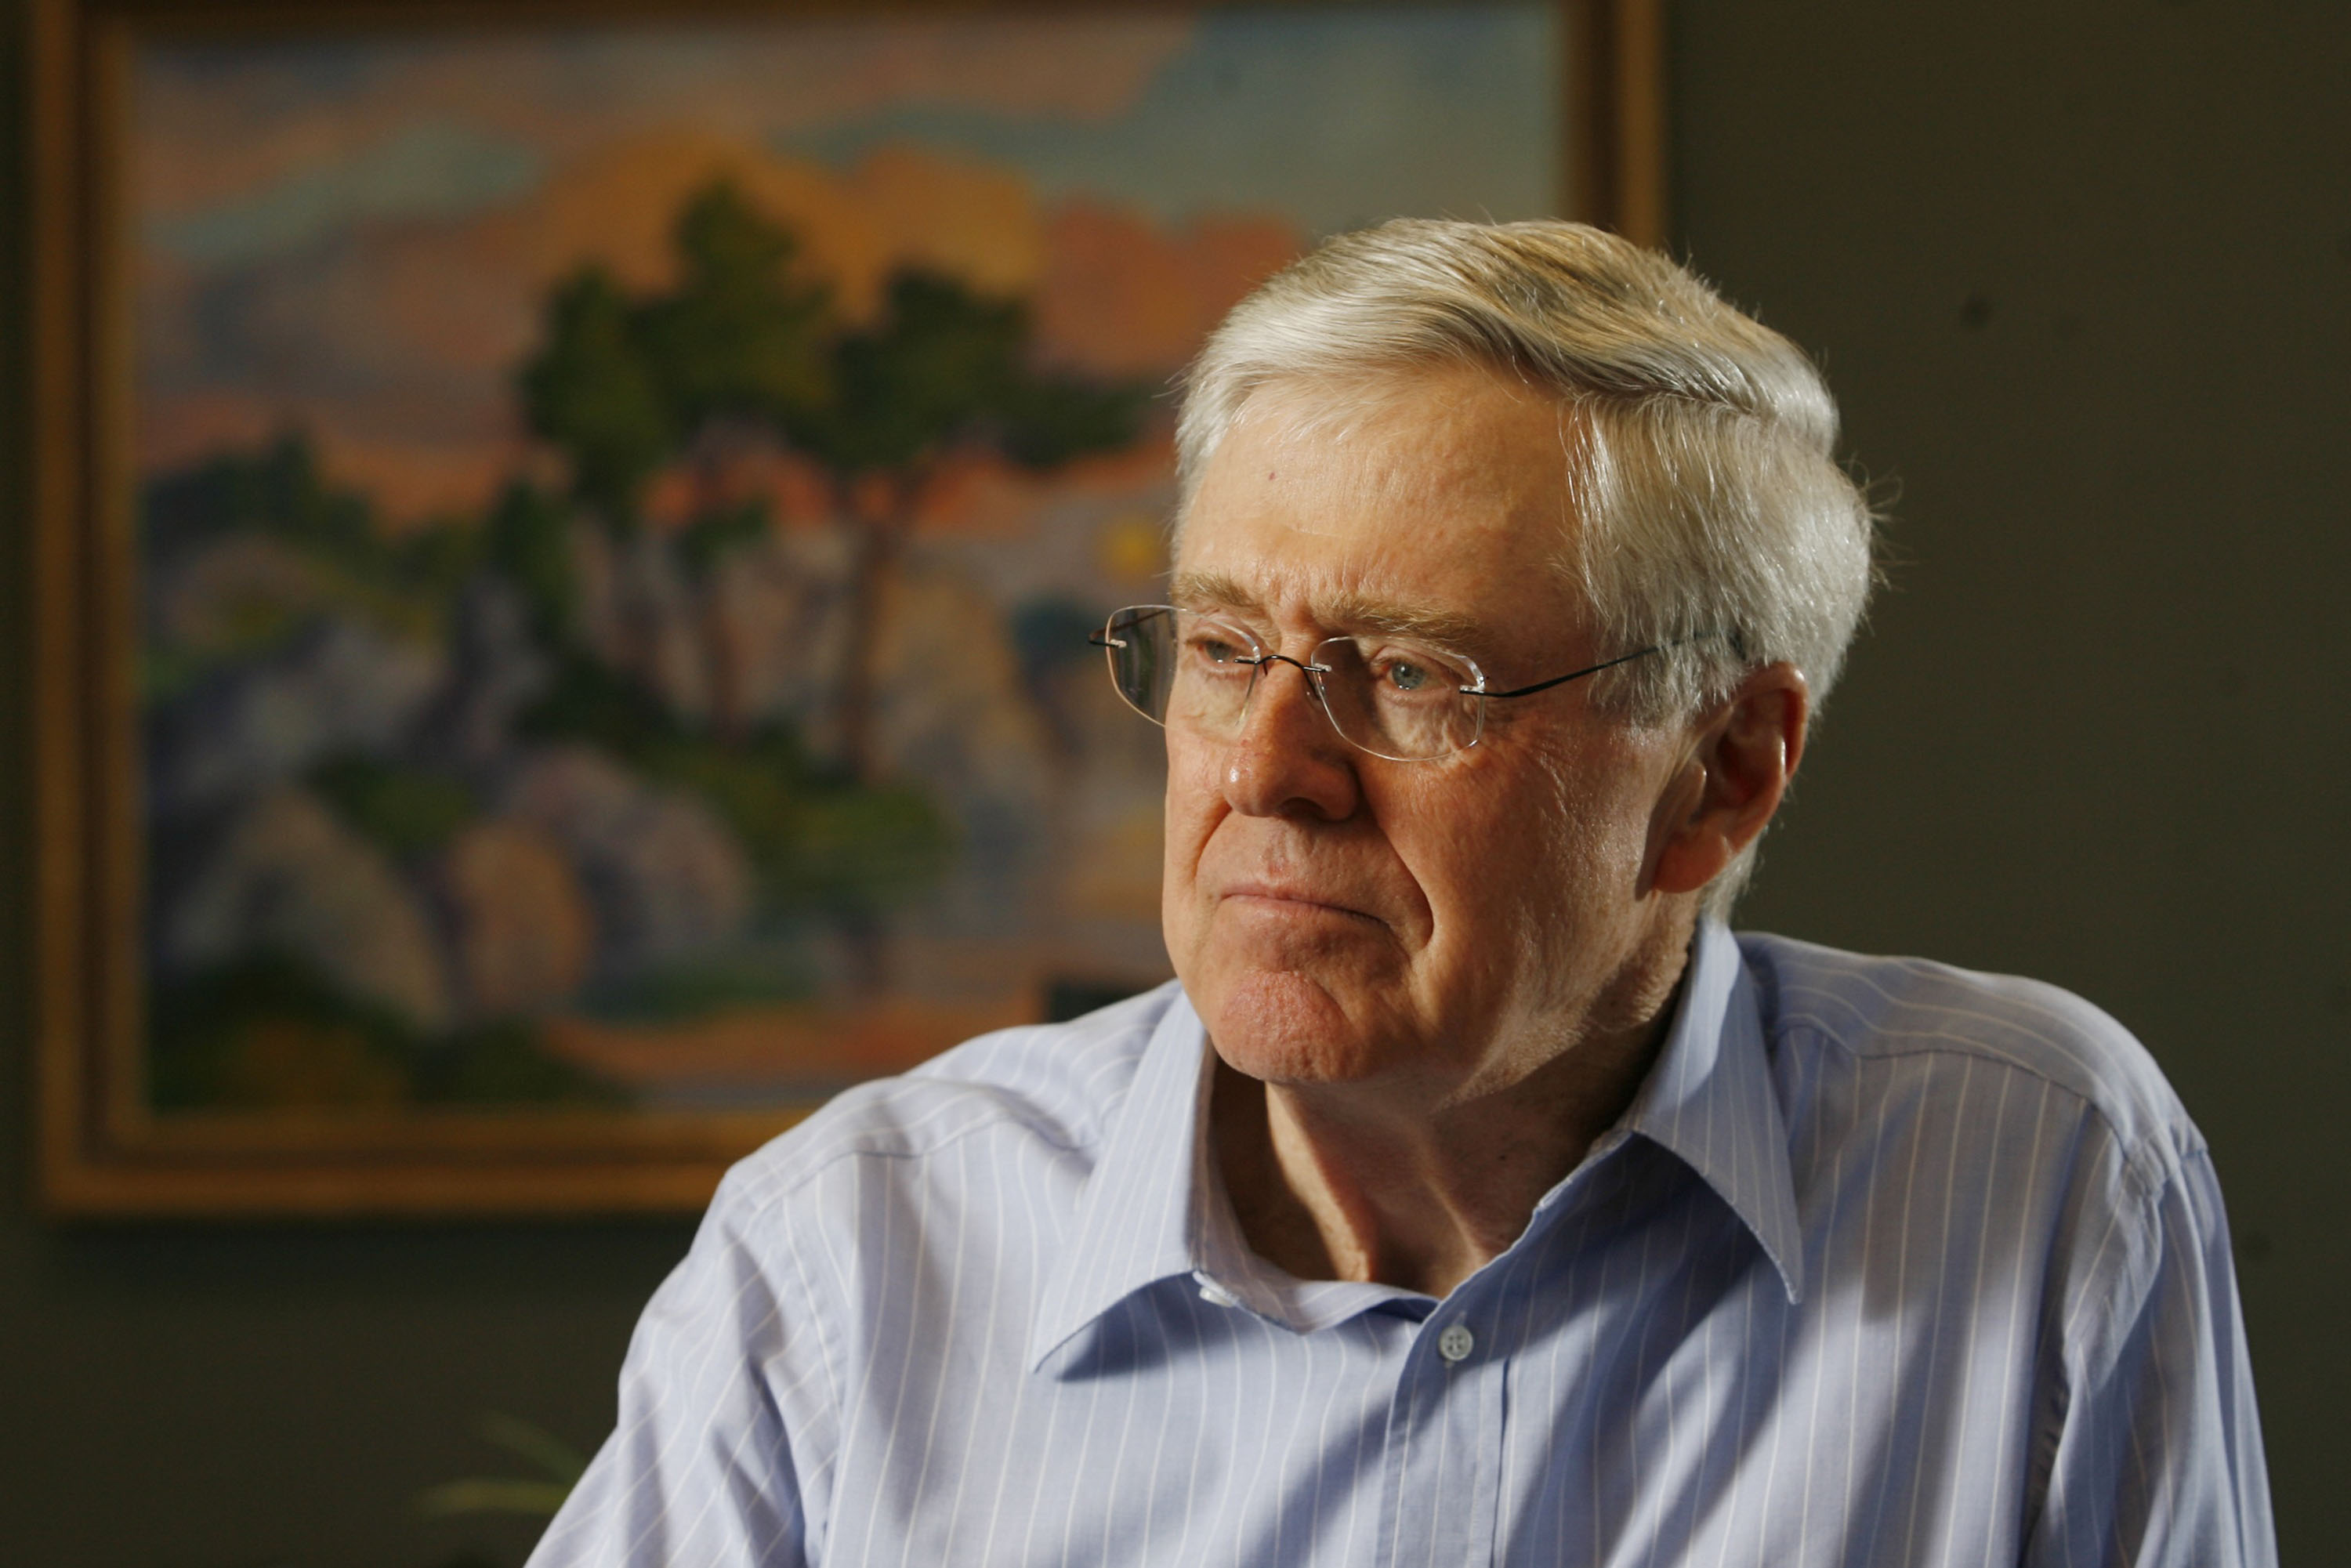 Charles Koch, head of Koch Industries, talks about his new book on Feb. 26, 2007. (Wichita Eagle—MCT/ Getty Images)